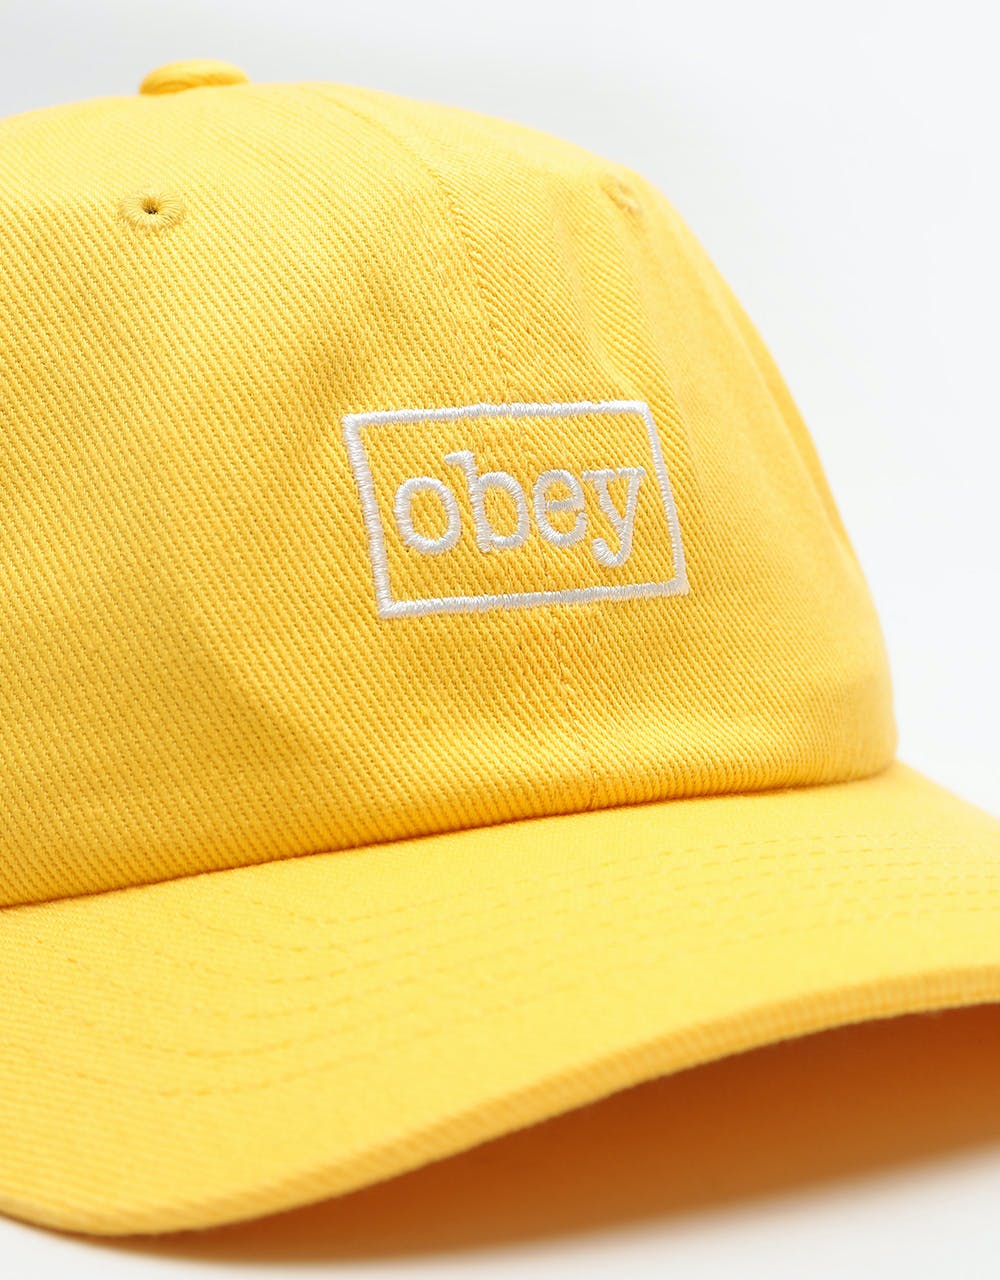 Obey Outline 6 Panel Cap - Dusty Yellow